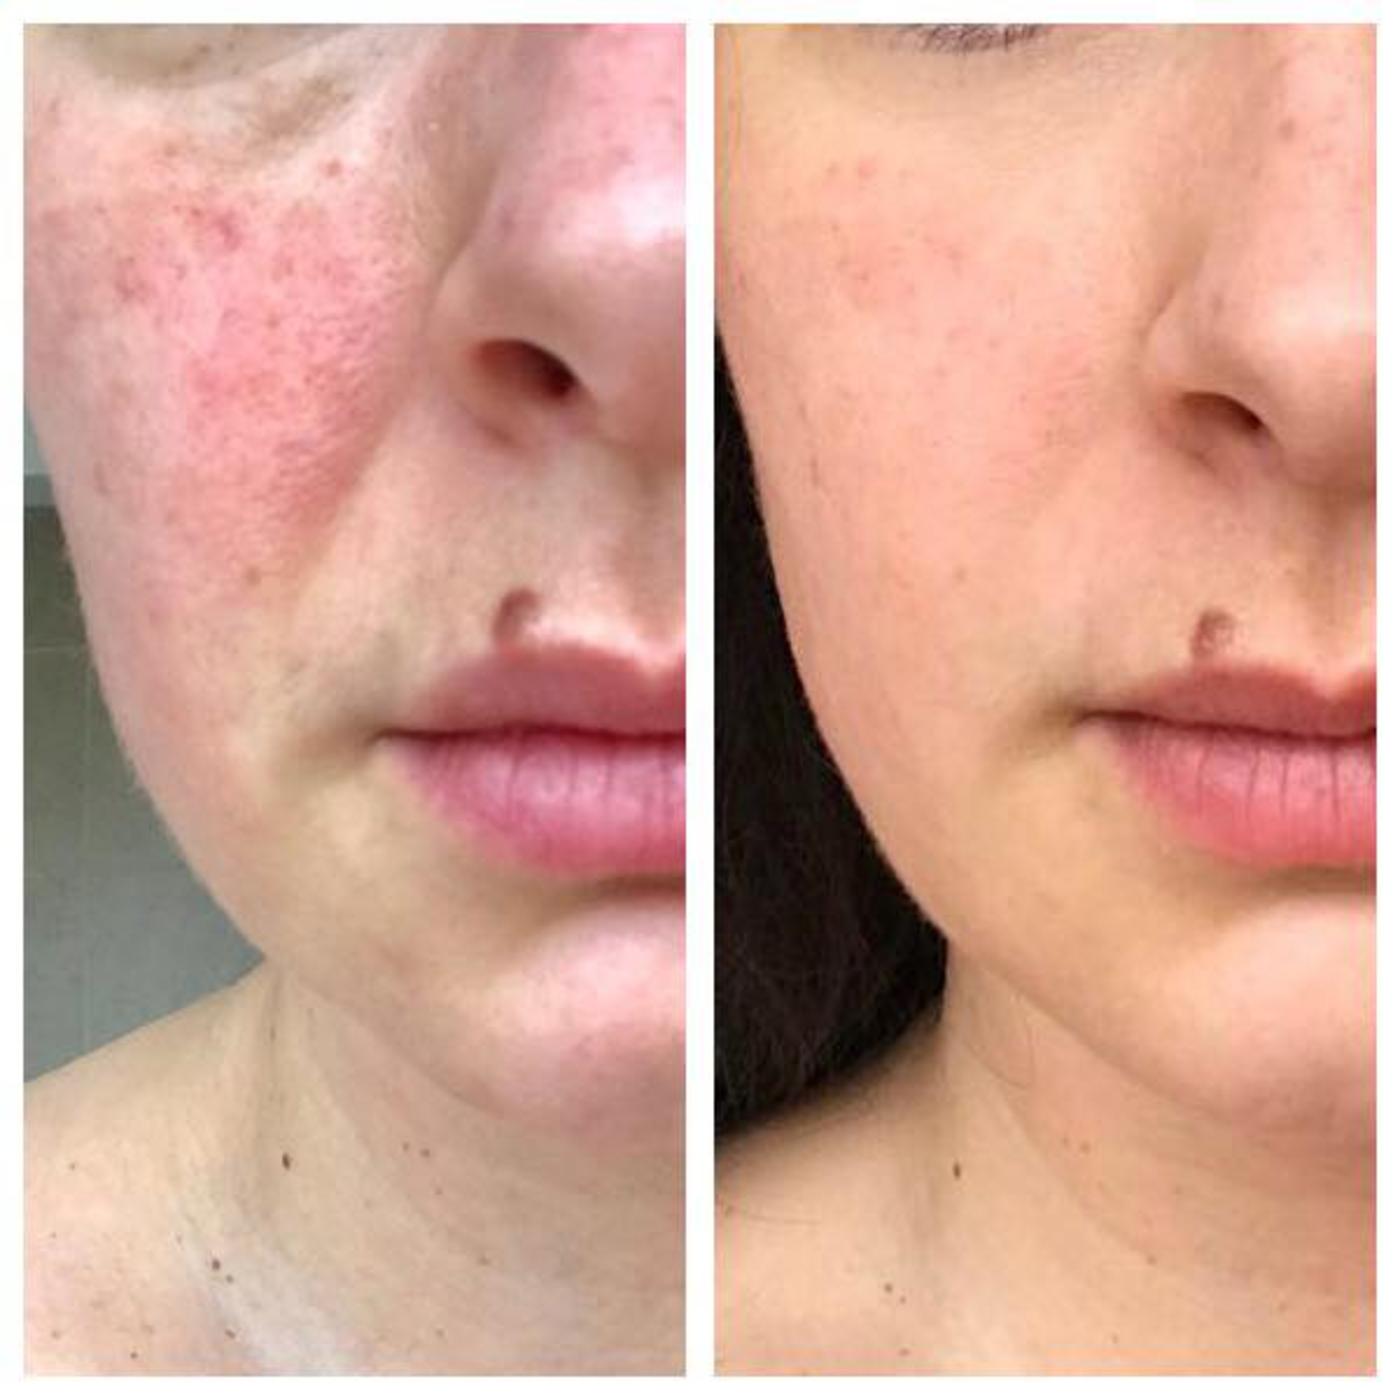 BEFORE & AFTER FOLLOWING NIMUE HOMECARE & IN SALON TREATMENTS FOR SENSITIVE SKIN FOR 6 MONTHS